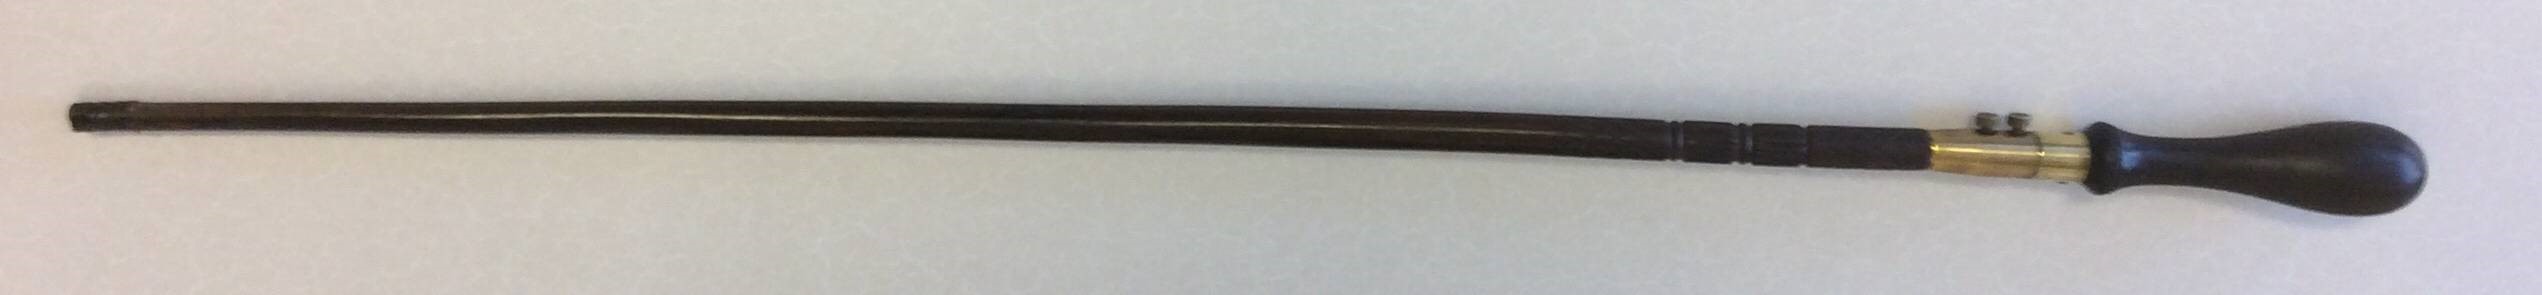 A simple rosewood stick with a brass section set just below the handle. Two small bolts hold the